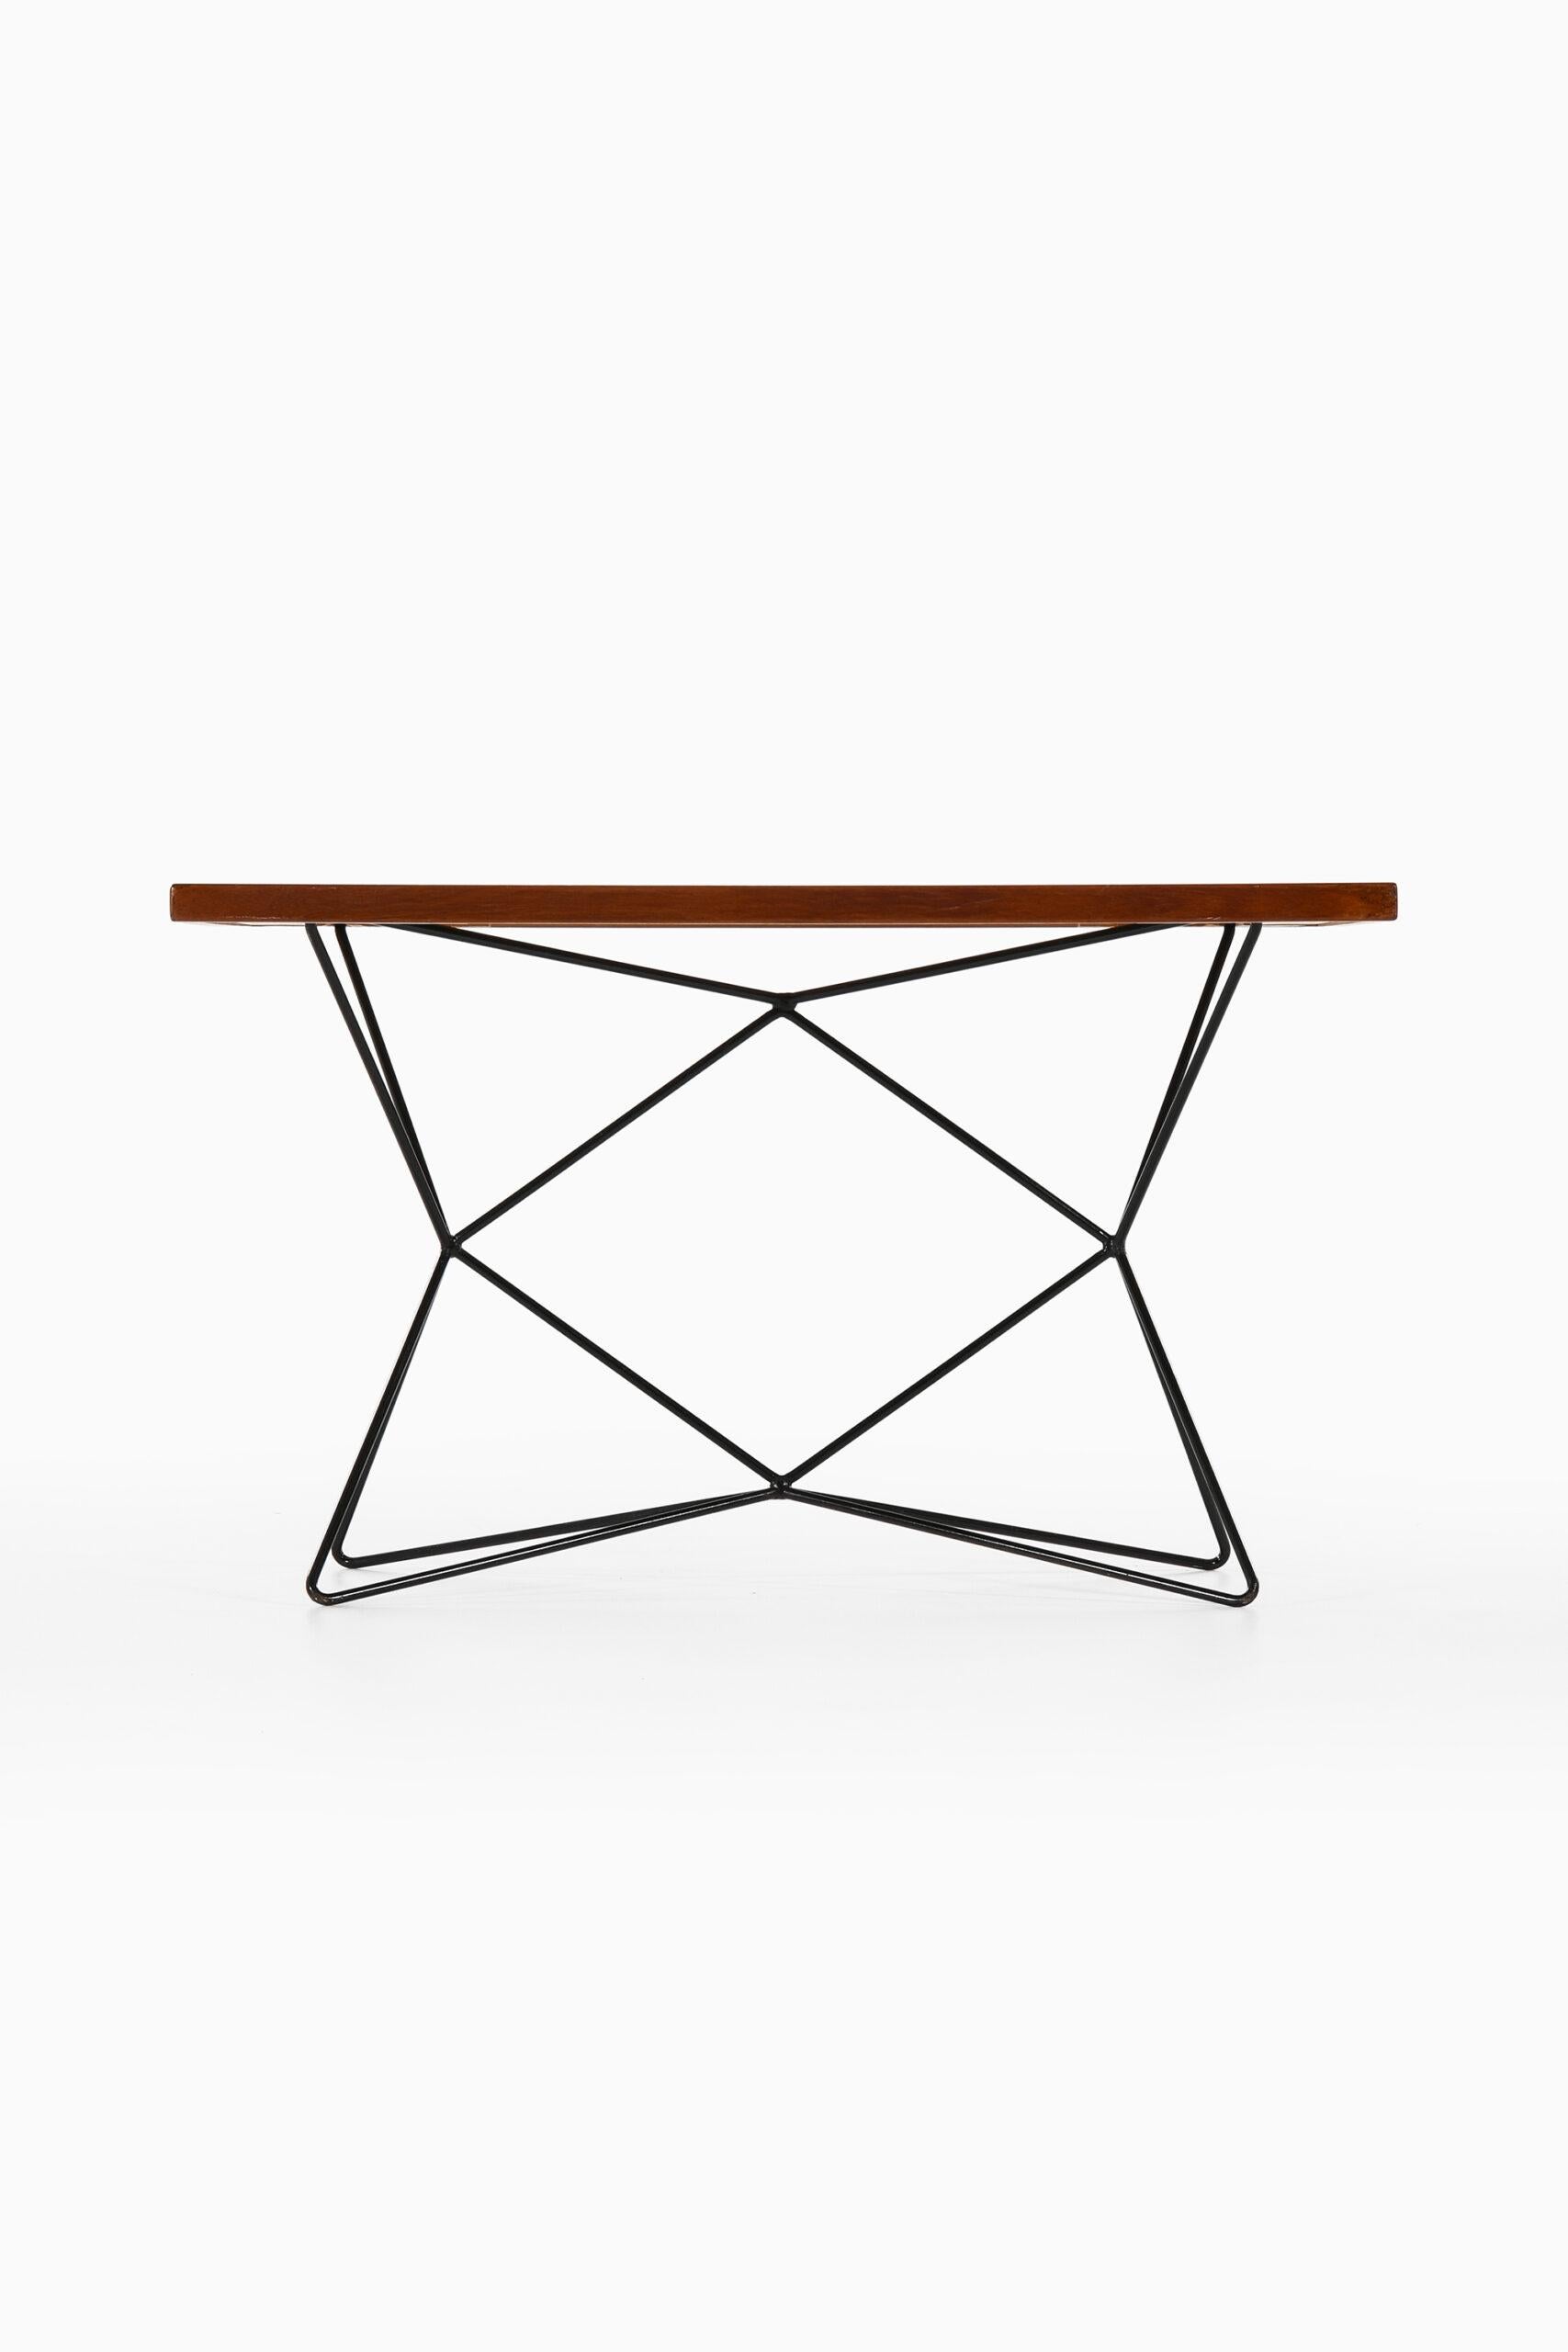 Rare table model A2 designed by Bengt Johan Gullberg. Produced by Gullberg Trading Company in Sweden.
Can be adjustable to coffee / dining / bar table.
Dimensions (W x D x H): 120 x 75 x 51,5 / 71,5 / 97 cm.